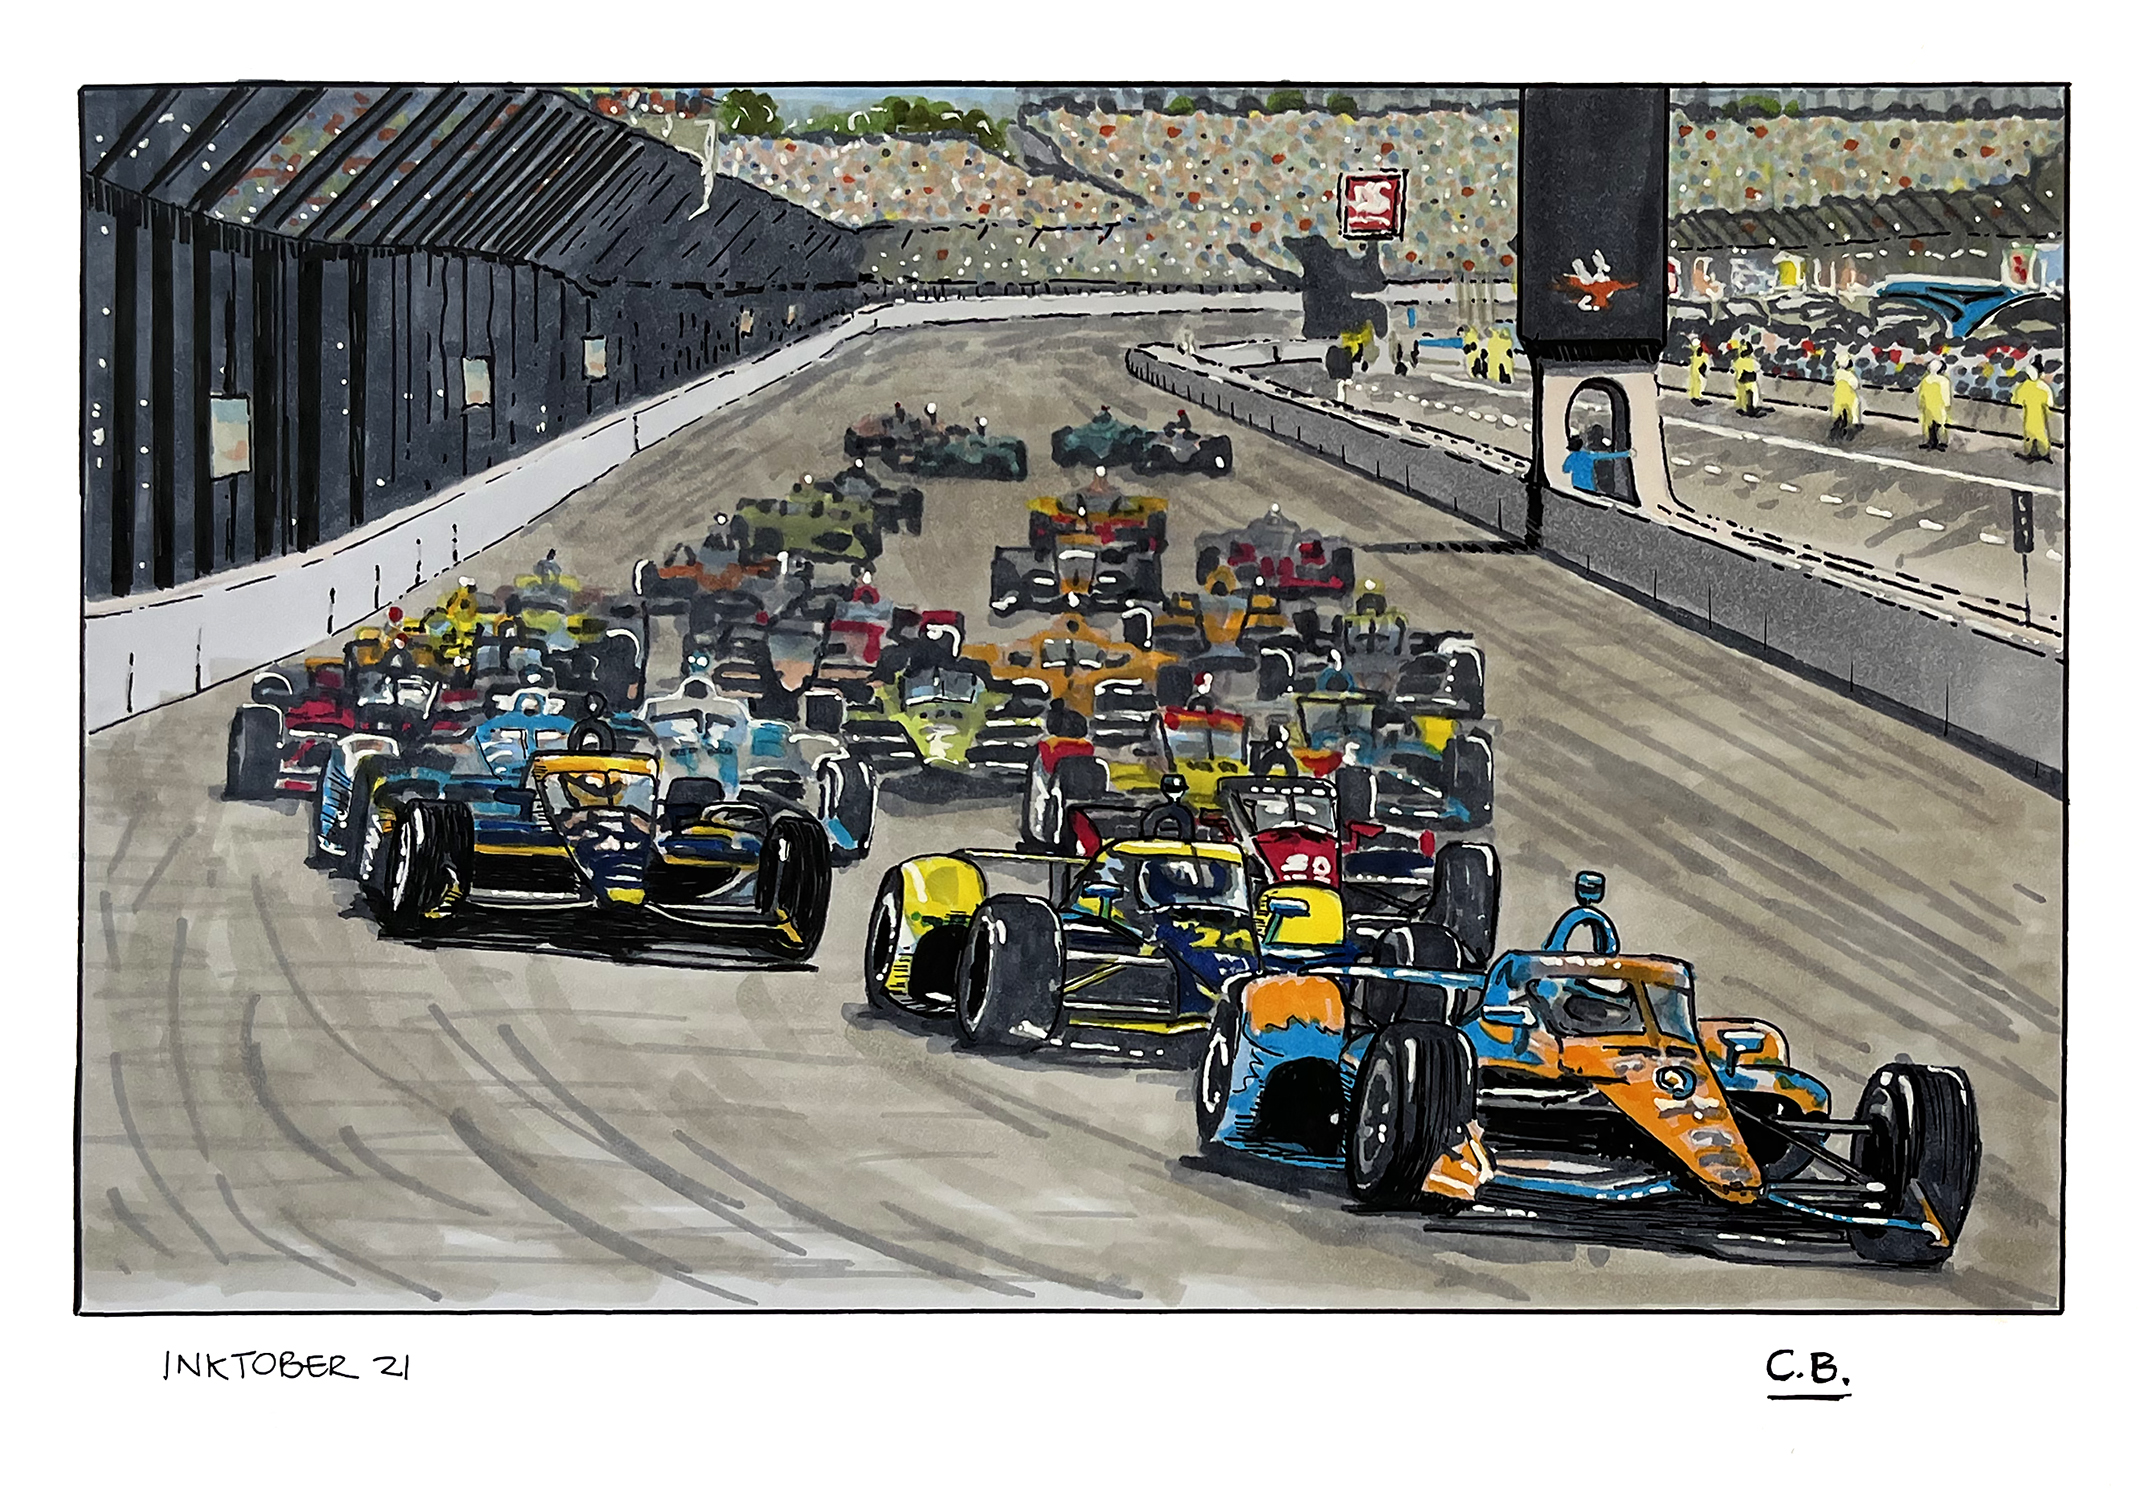 Drawing of the Indy 500 race